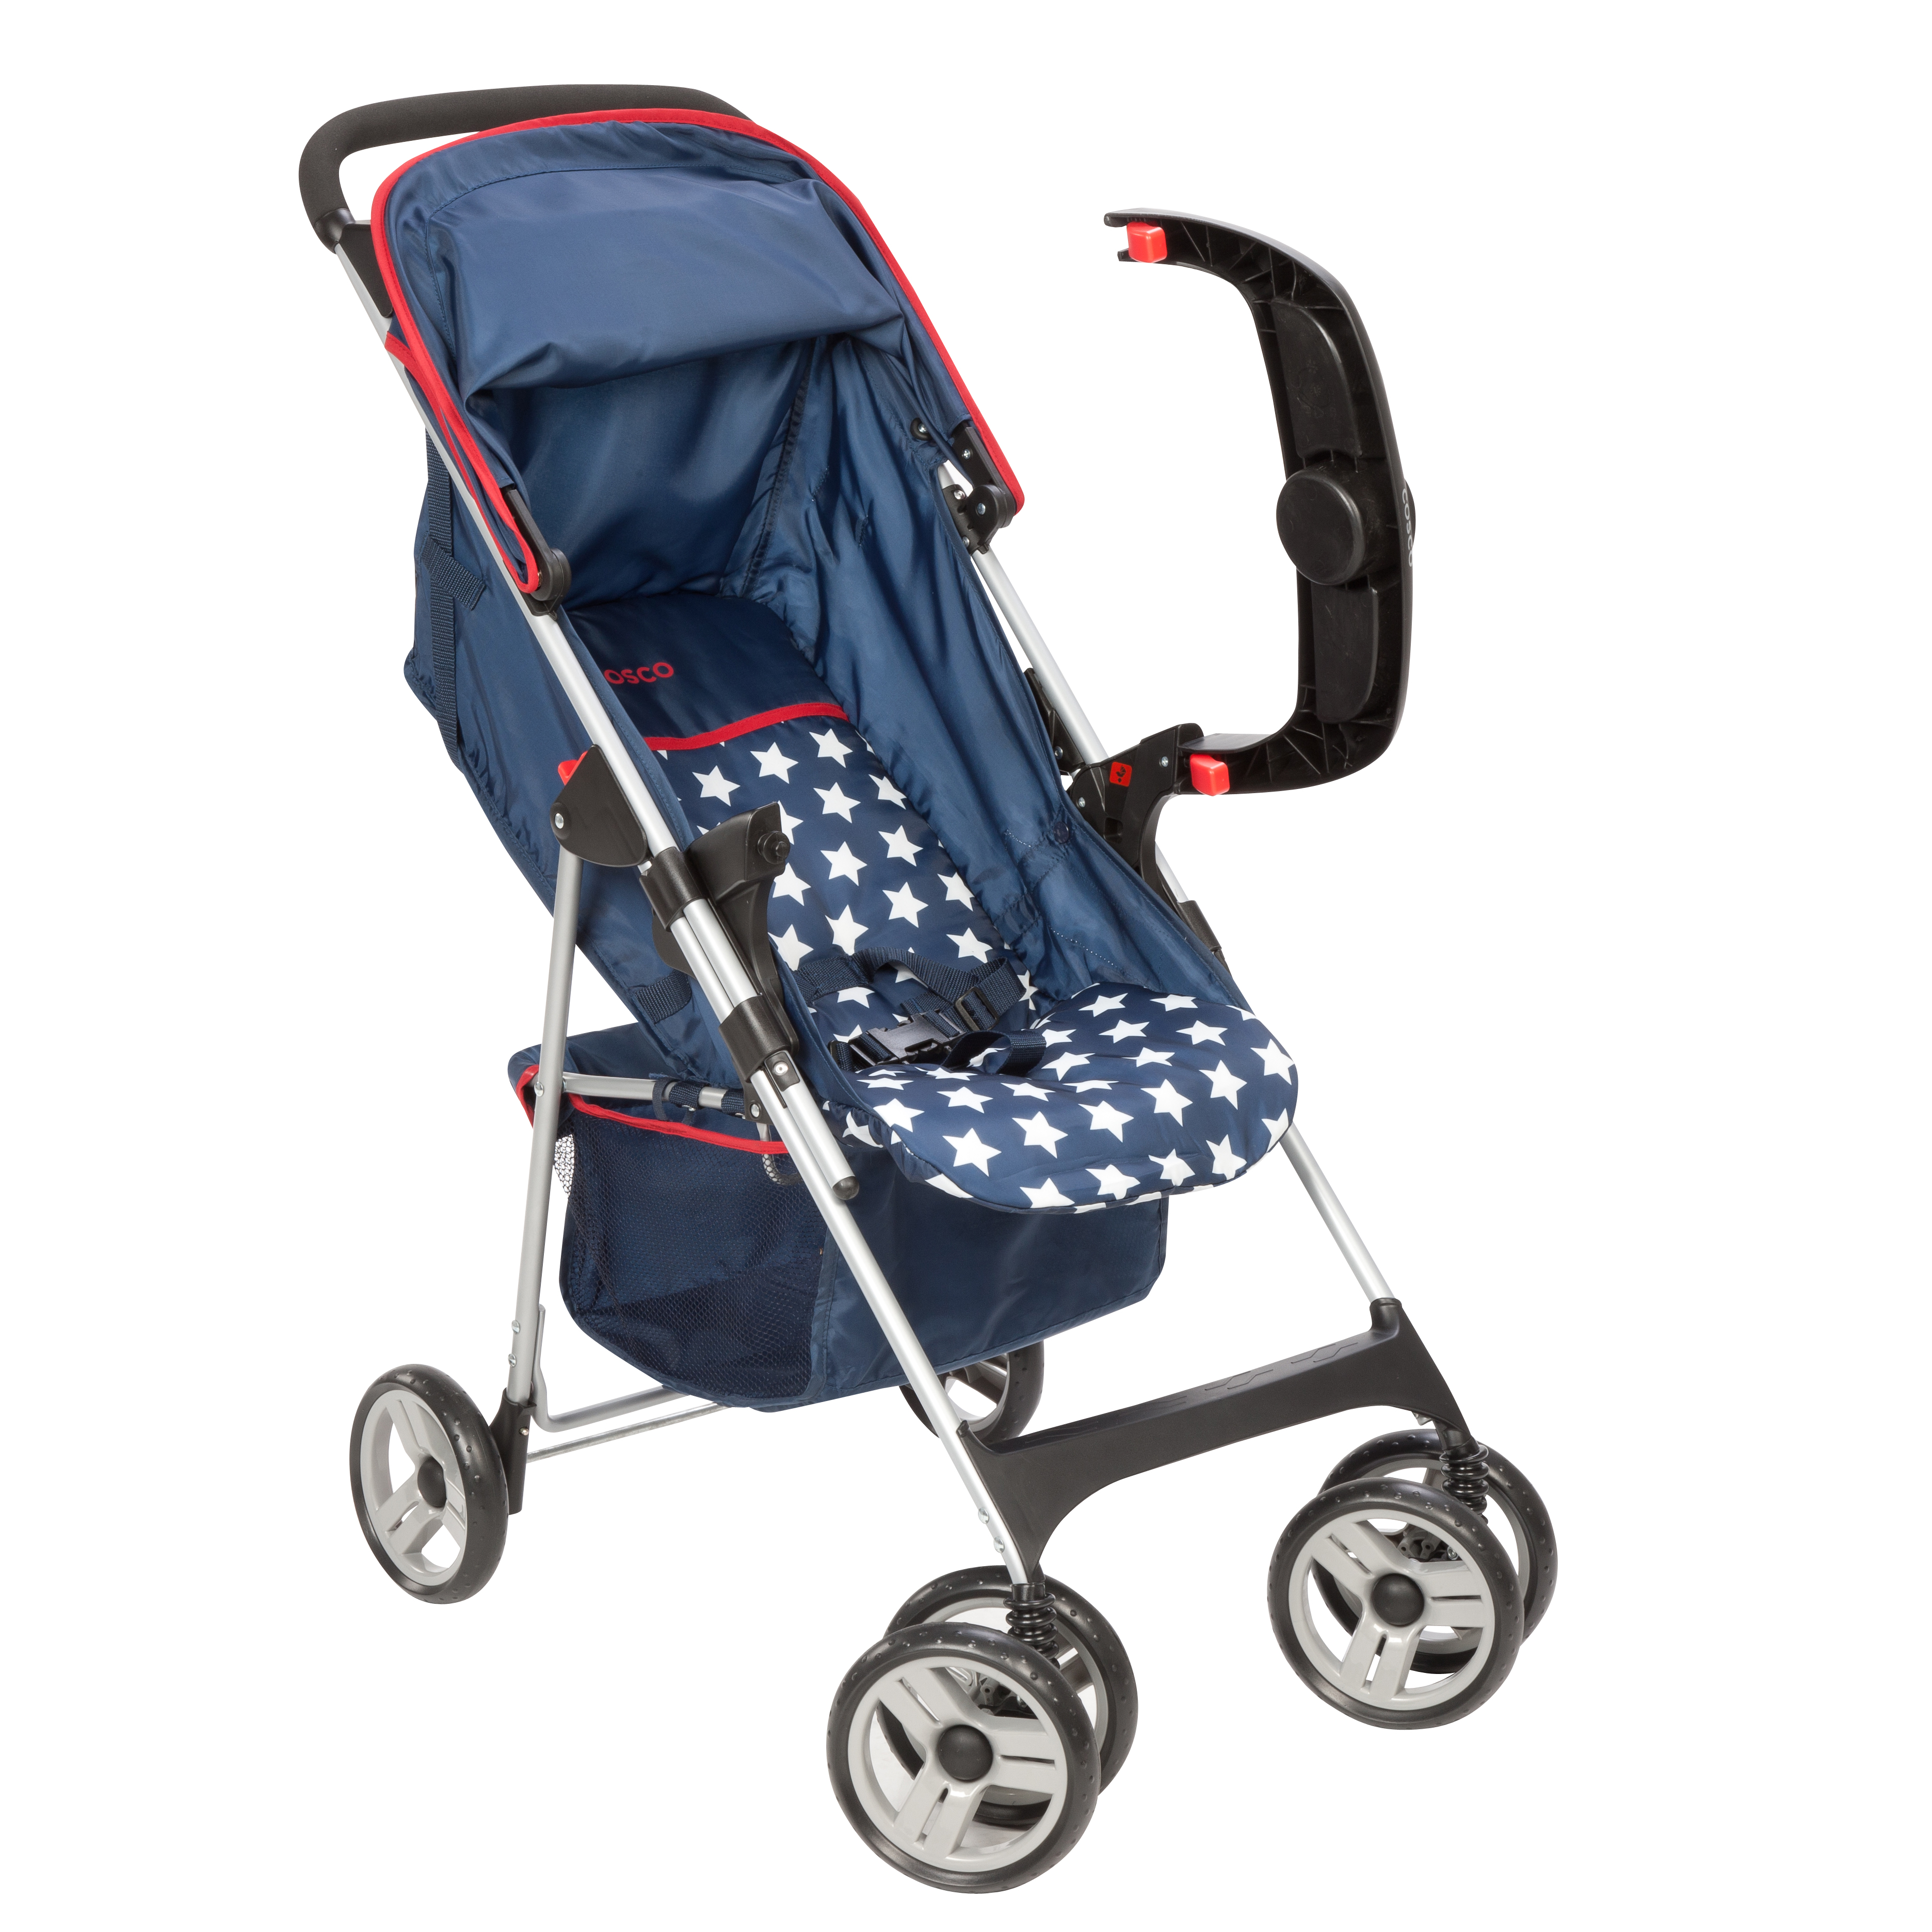 Cosco Commuter Compact Travel System - image 5 of 6